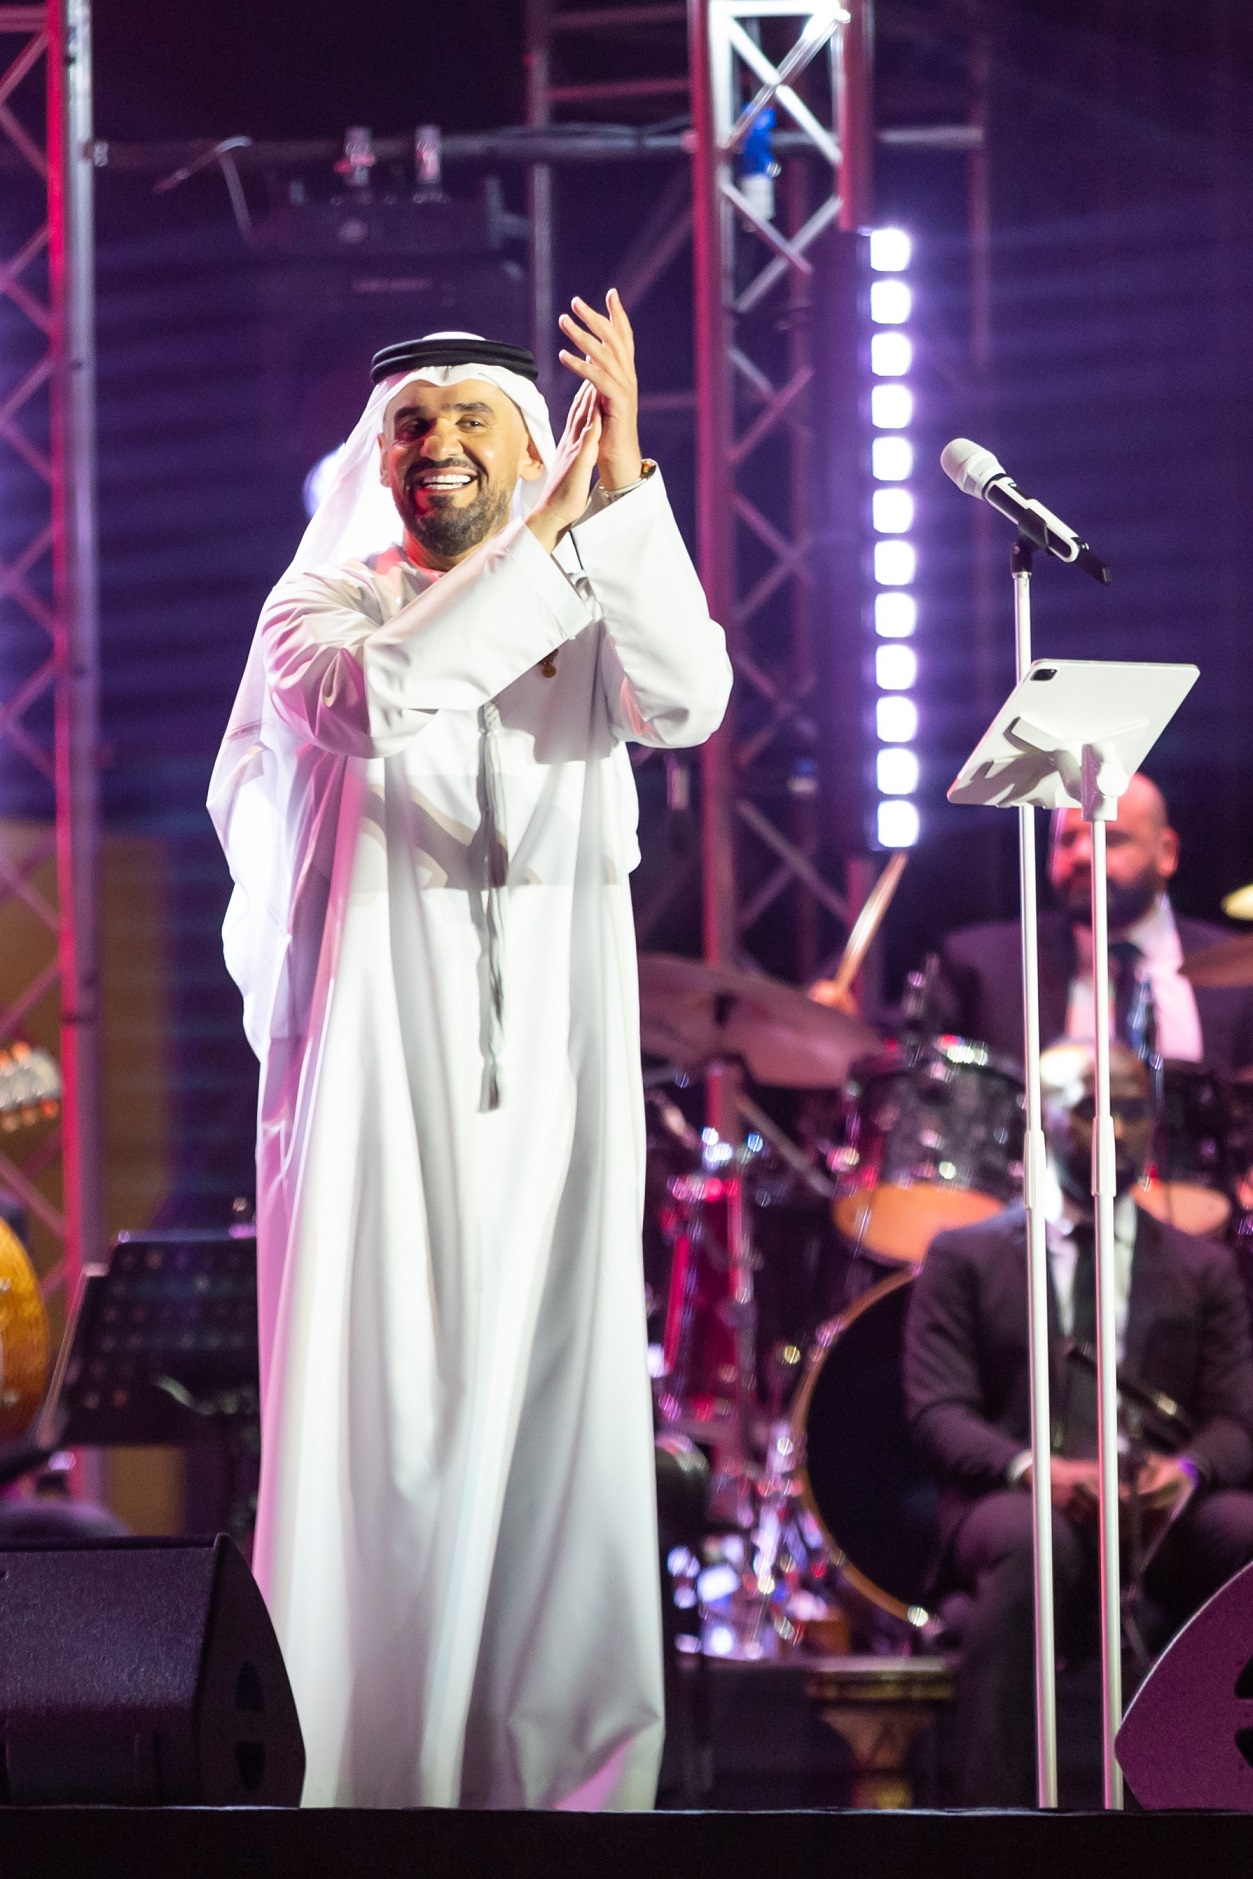 UAE 51st National Day Concerts Start with a Stellar Performance by Hussain Al Jassmi